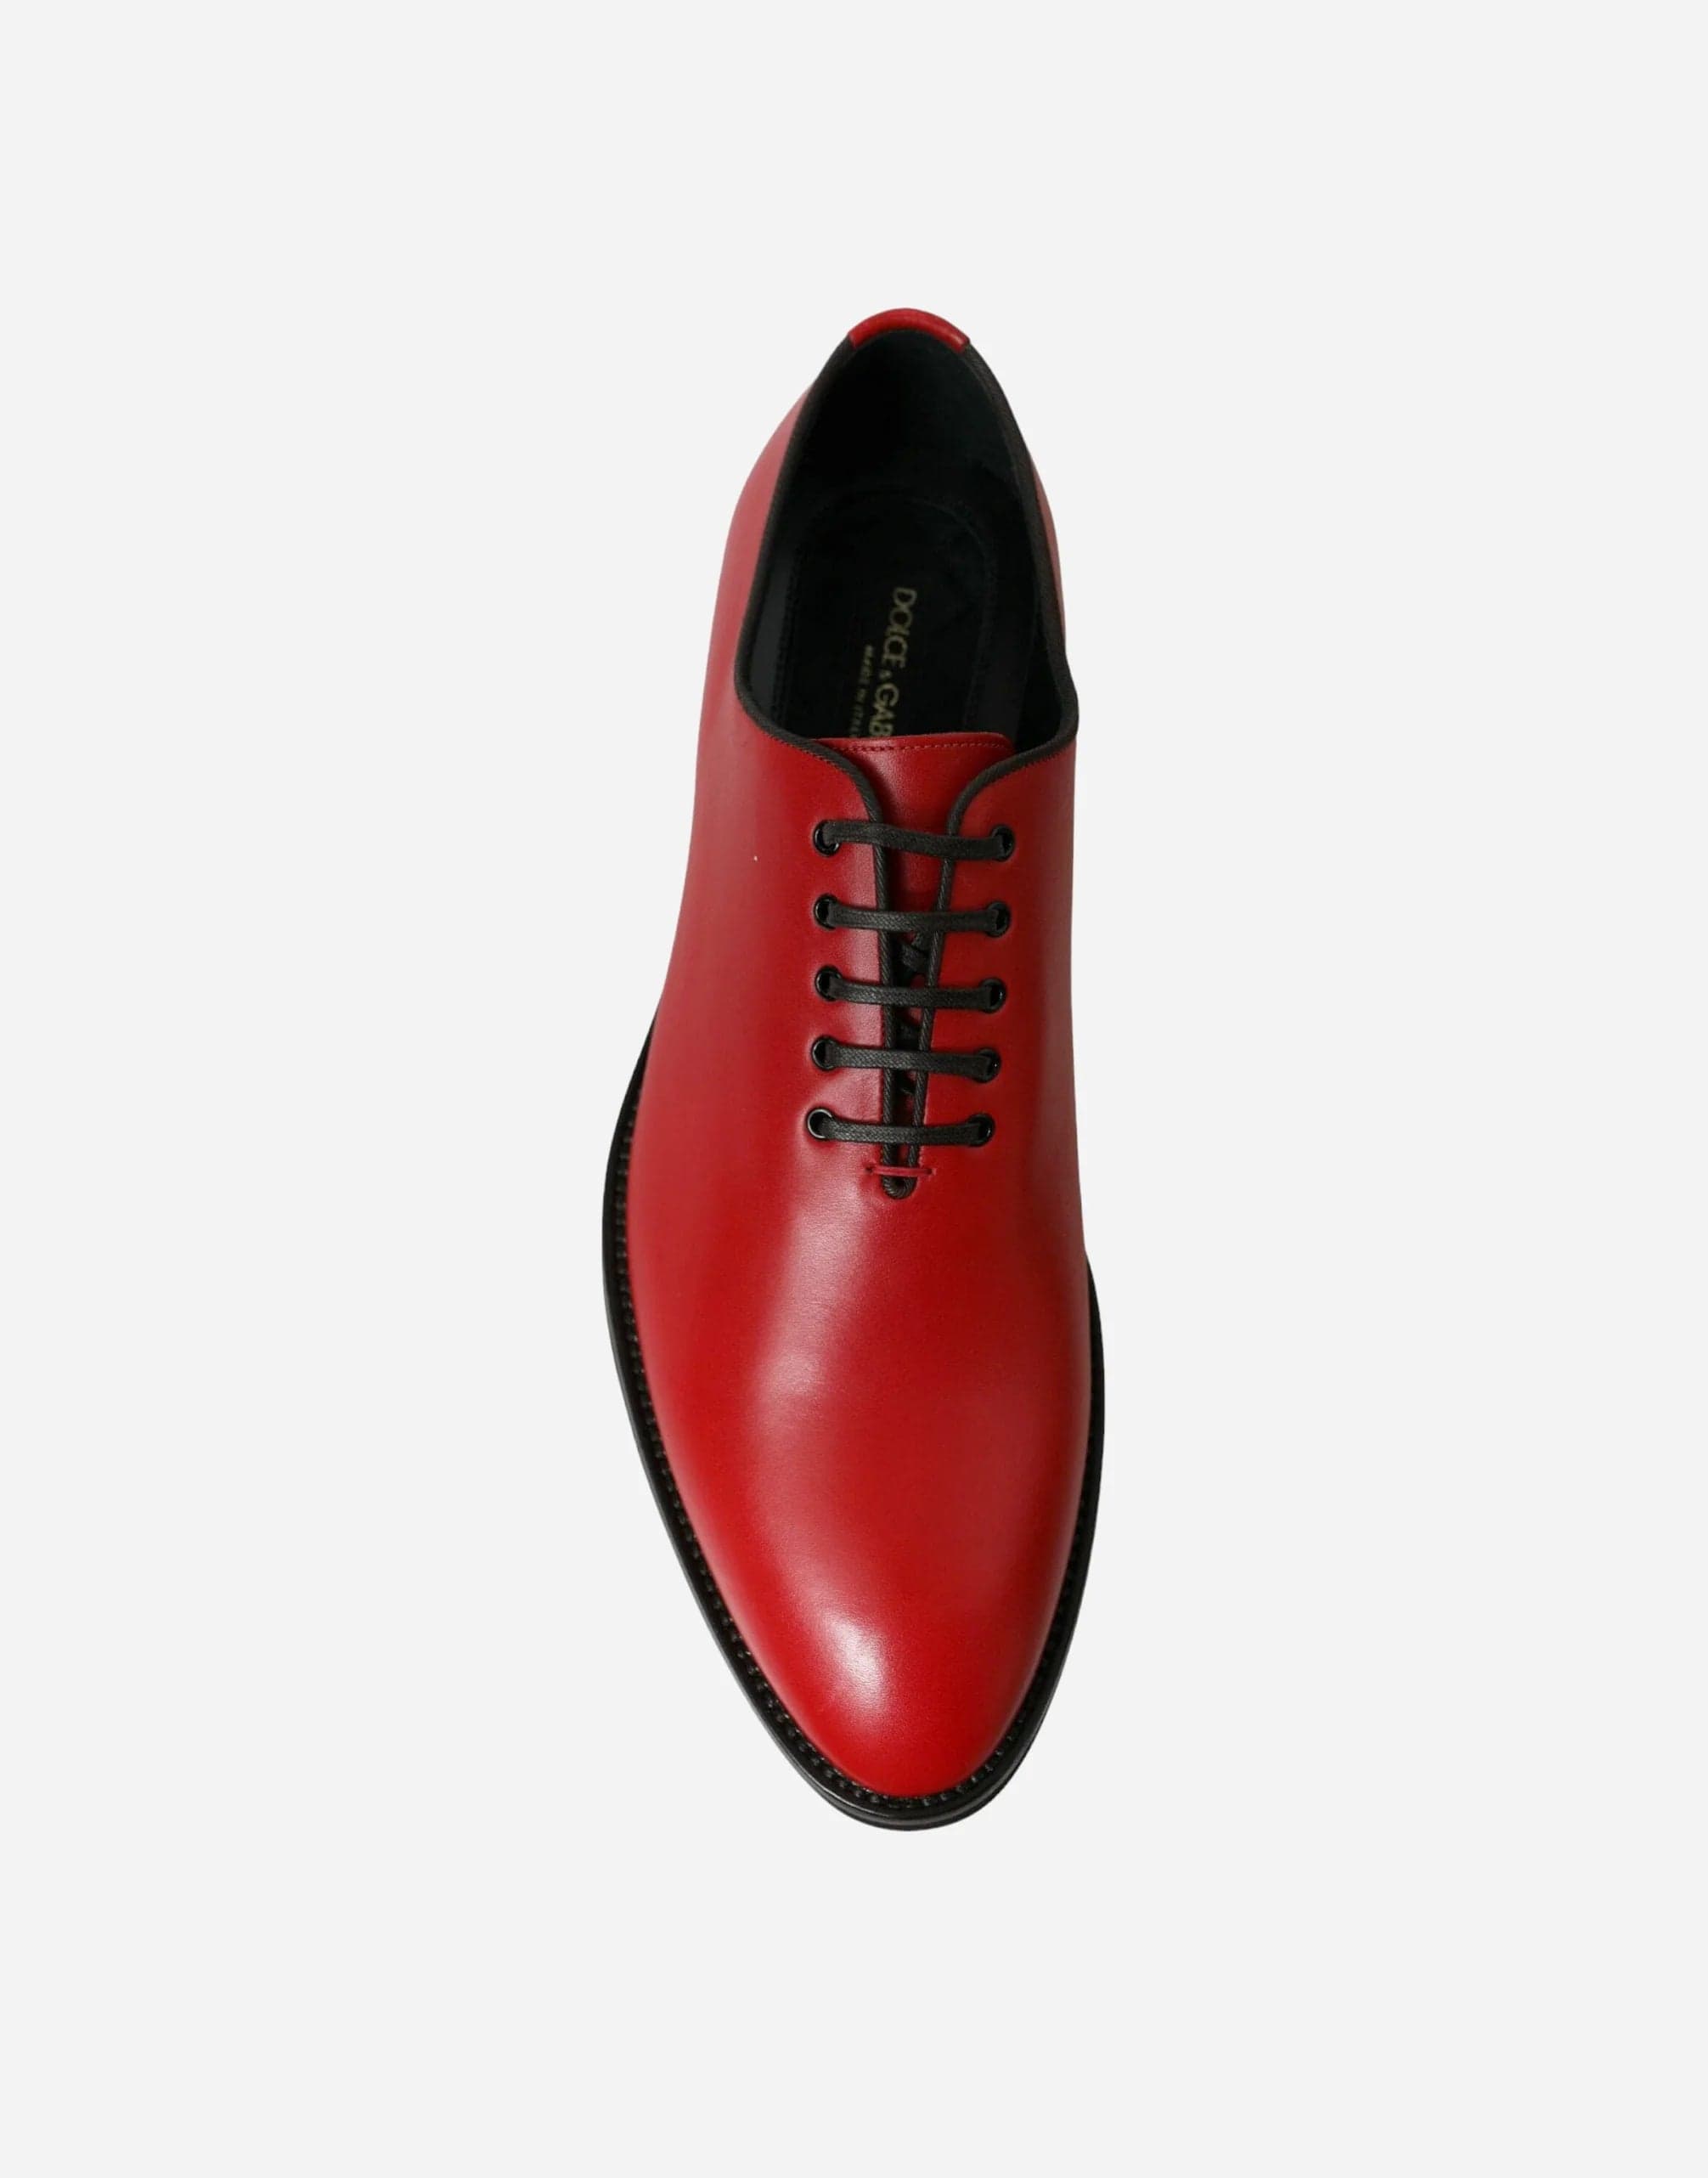 Lace Up Oxford Dress Shoes